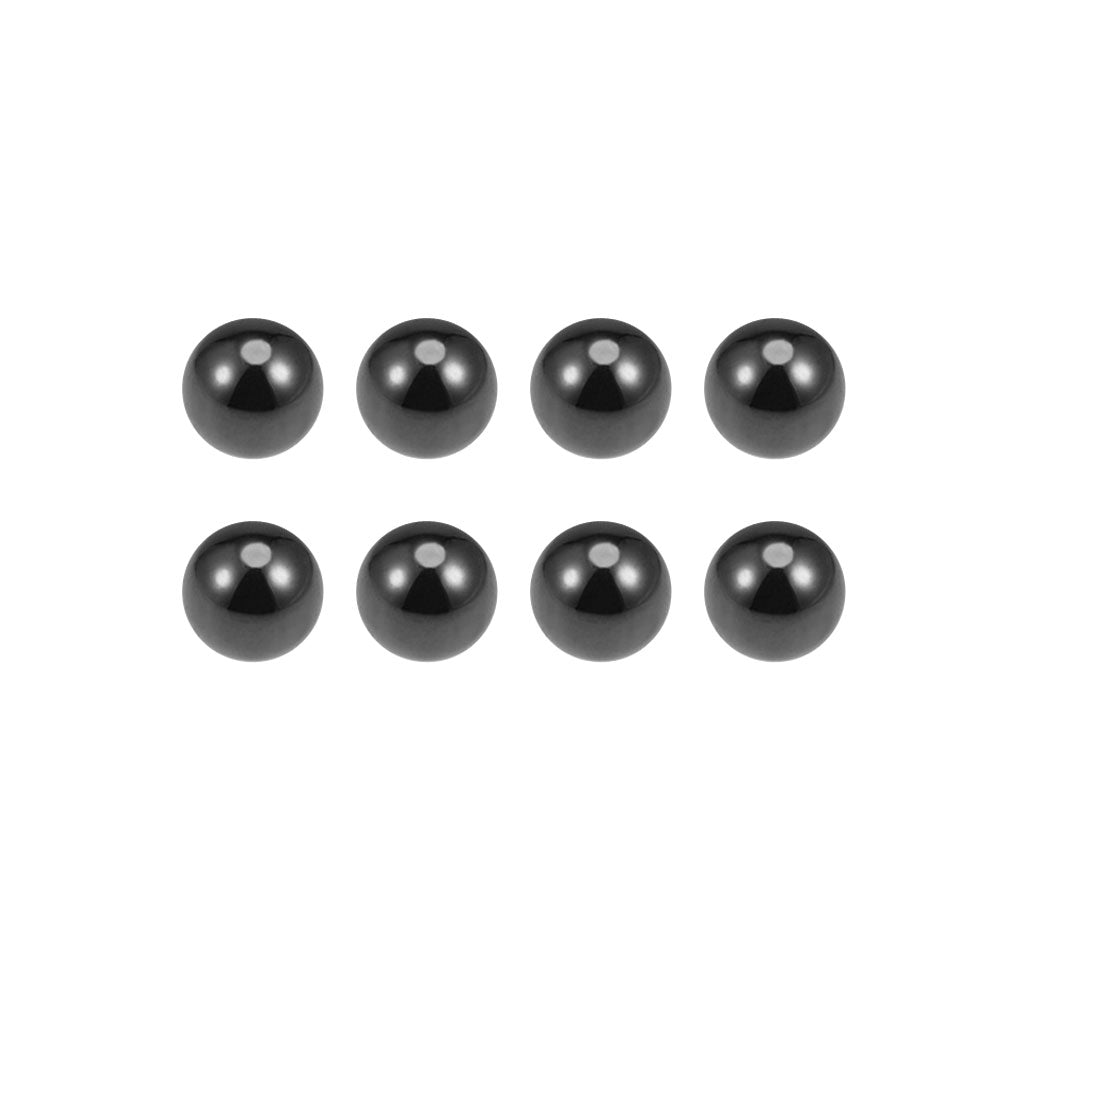 Uxcell Uxcell 2mm Ceramic Bearing Balls, Si3N4 Silicon Nitride Ball G5 Precision 25pcs